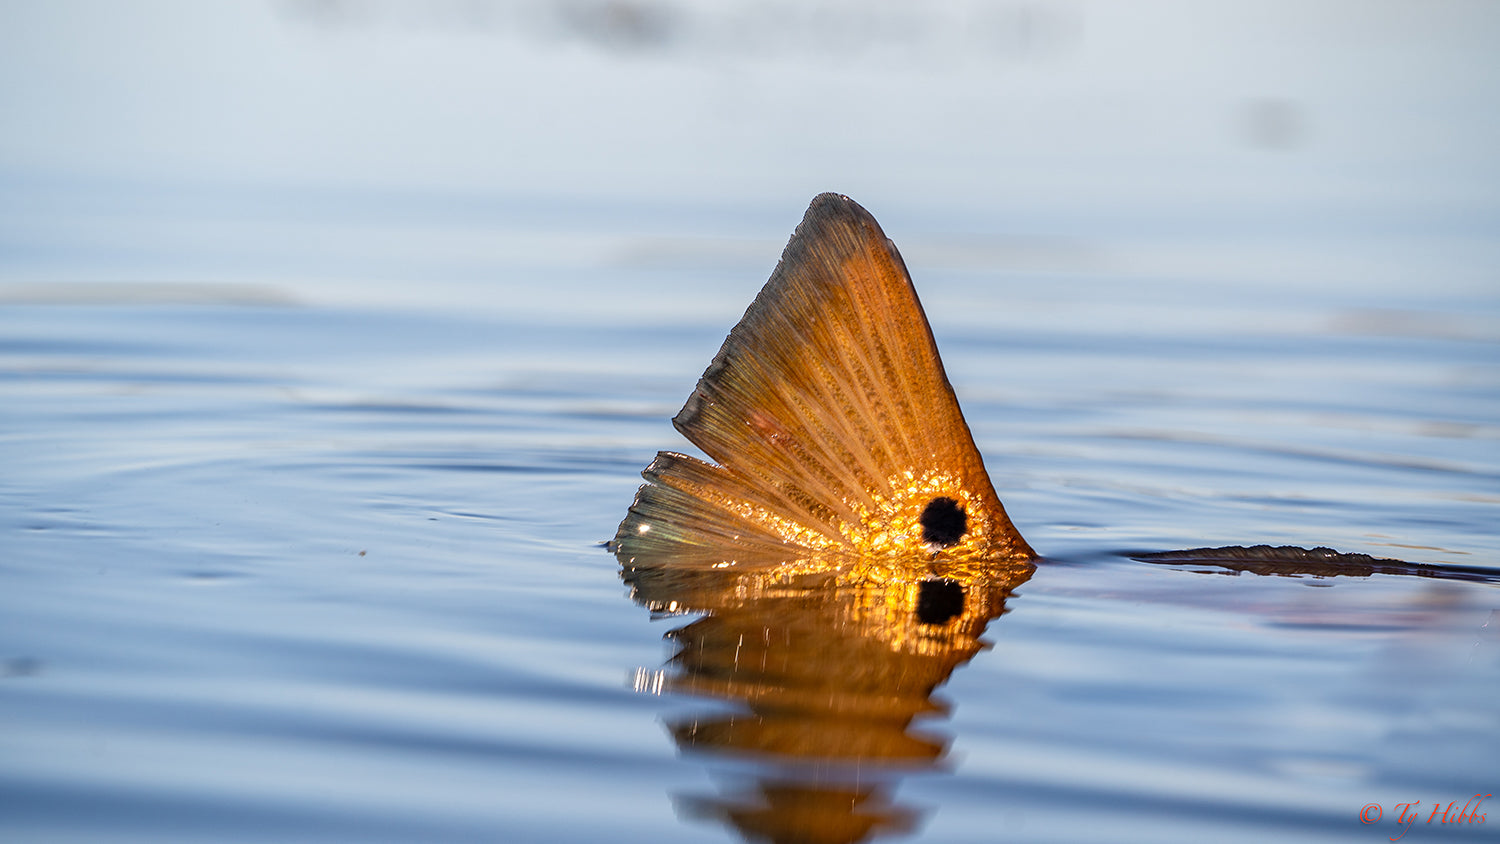 HELP TO CAUSE CHANGE FOR LOUISIANA’S REDFISH